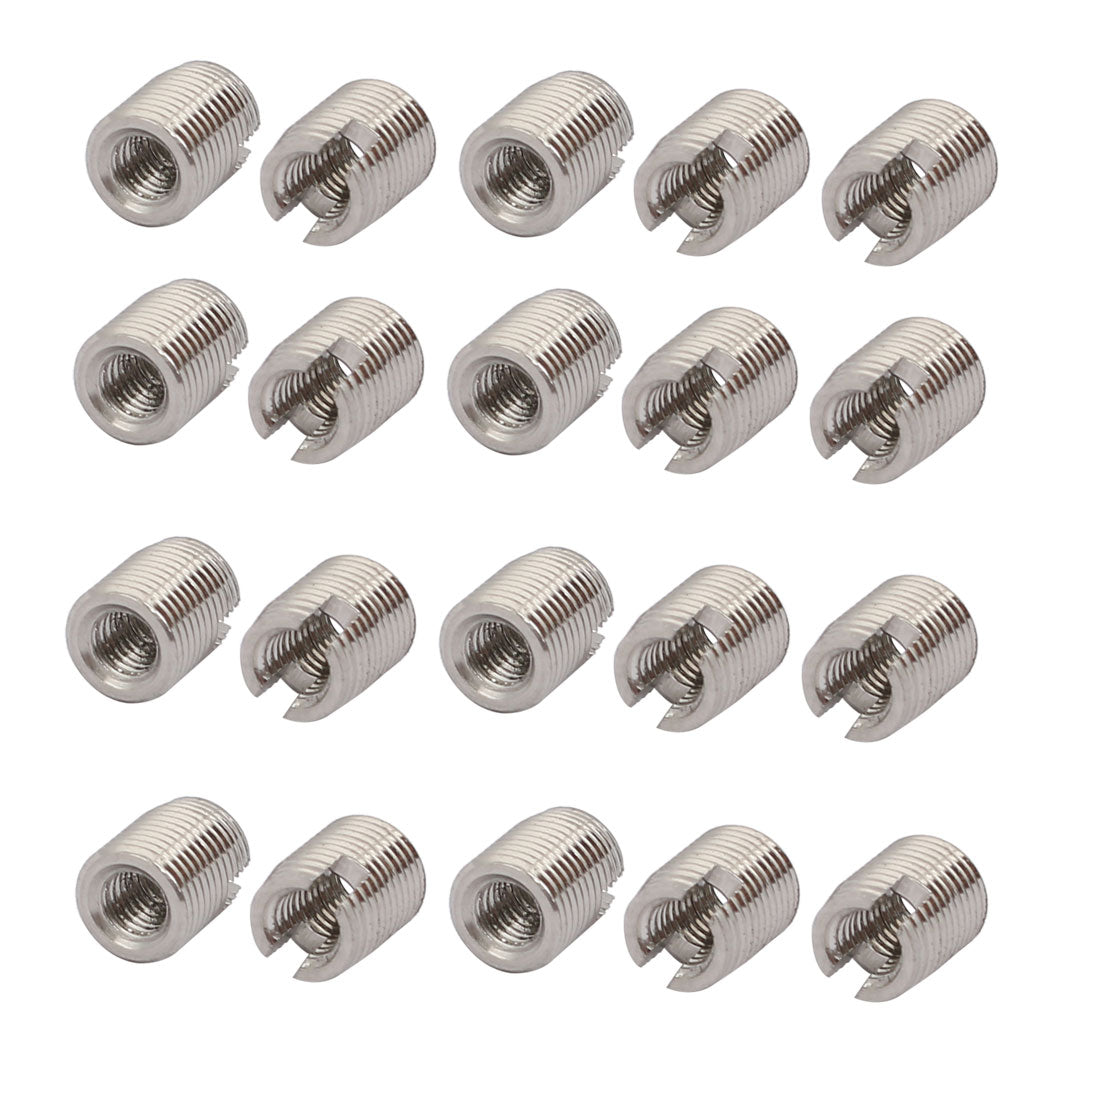 uxcell Uxcell M3x6mm 304 Stainless Steel Self Tapping Slotted Thread Insert 20pcs